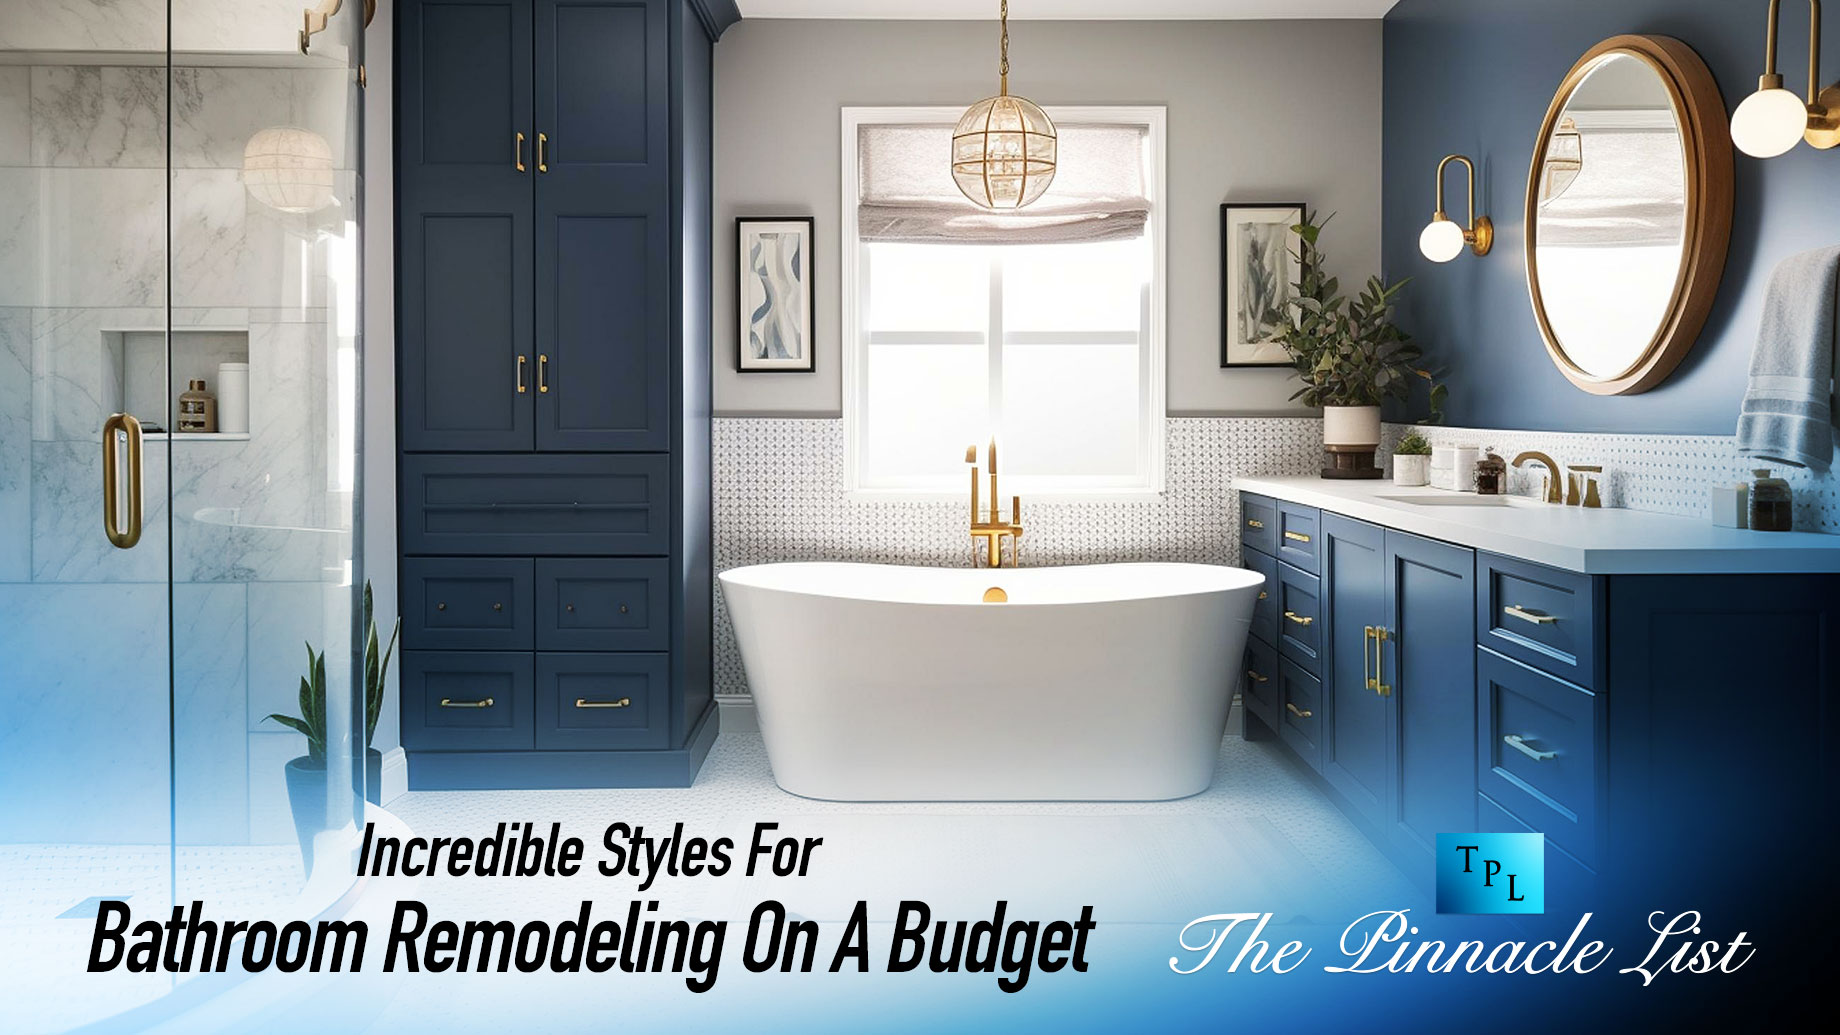 Incredible Styles For Bathroom Remodeling On A Budget